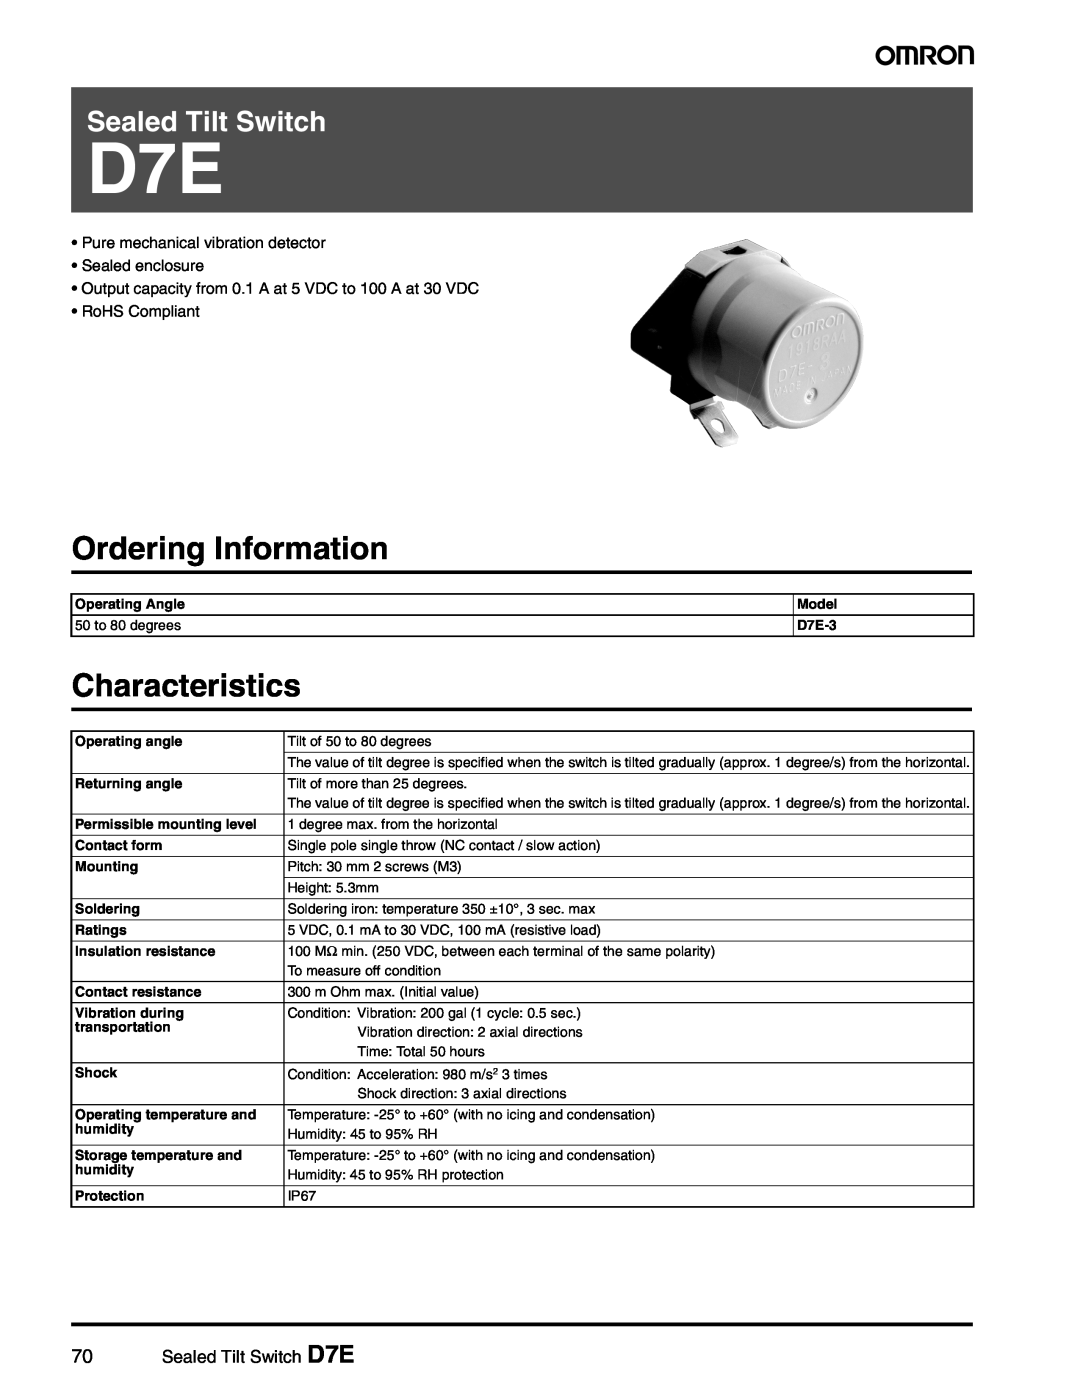 Omron Healthcare manual Ordering Information, Characteristics, Sealed Tilt Switch D7E 